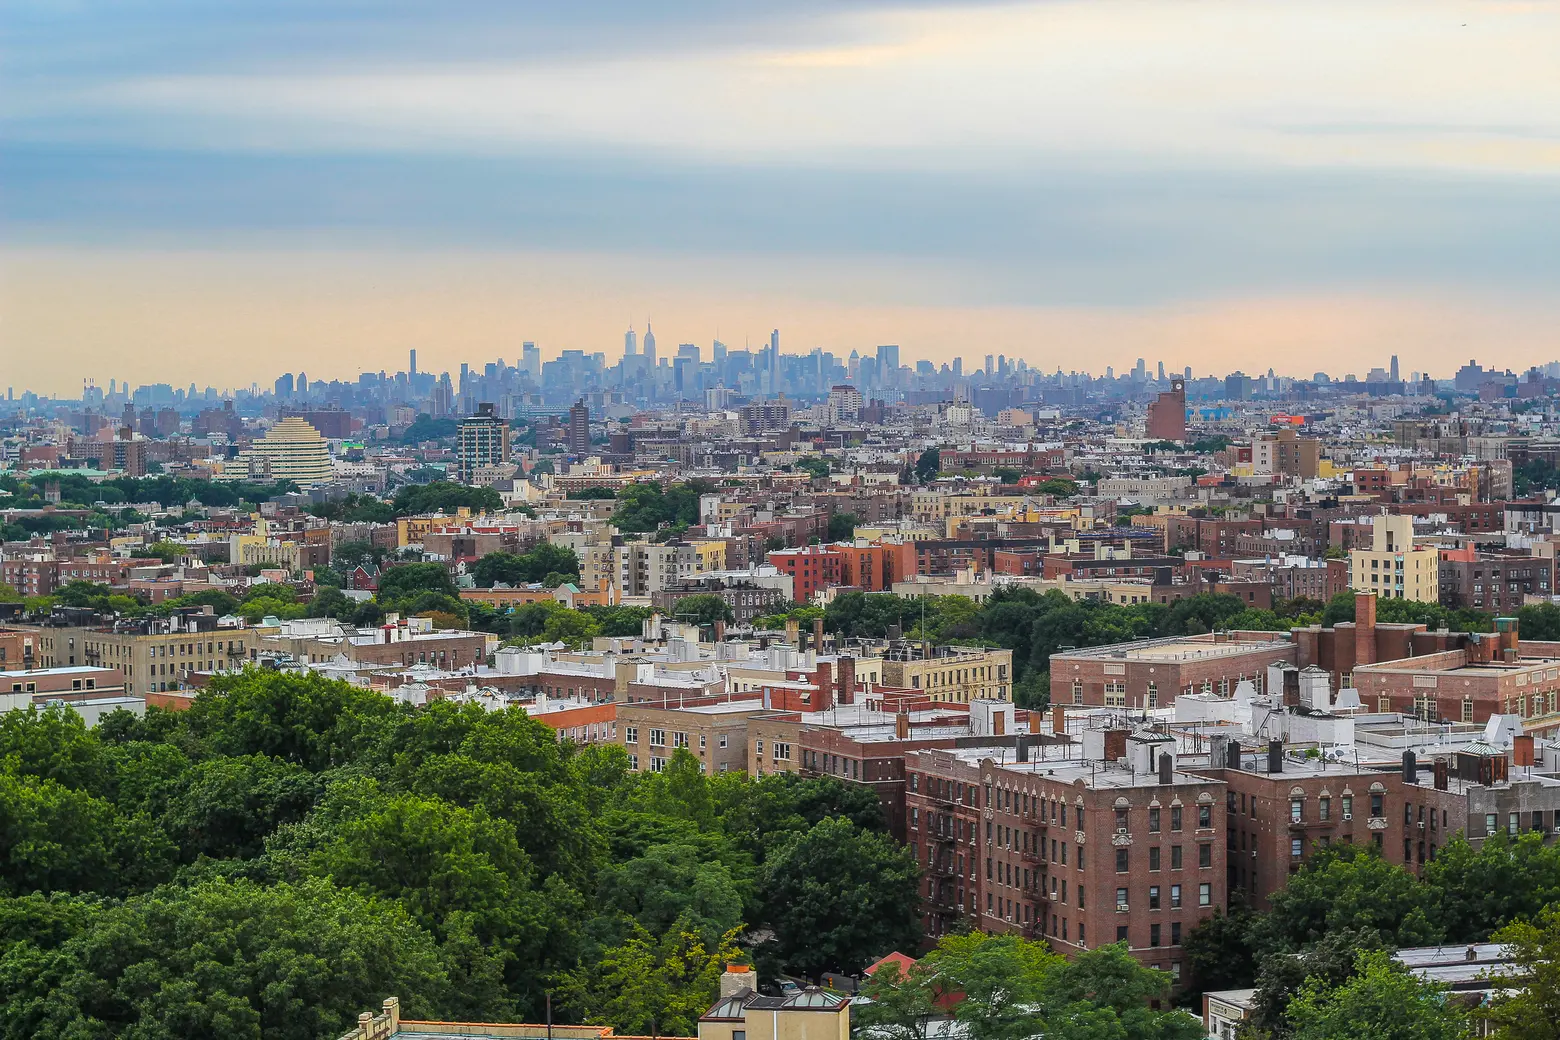 With most approved residential units in NYC, the Bronx building boom continues